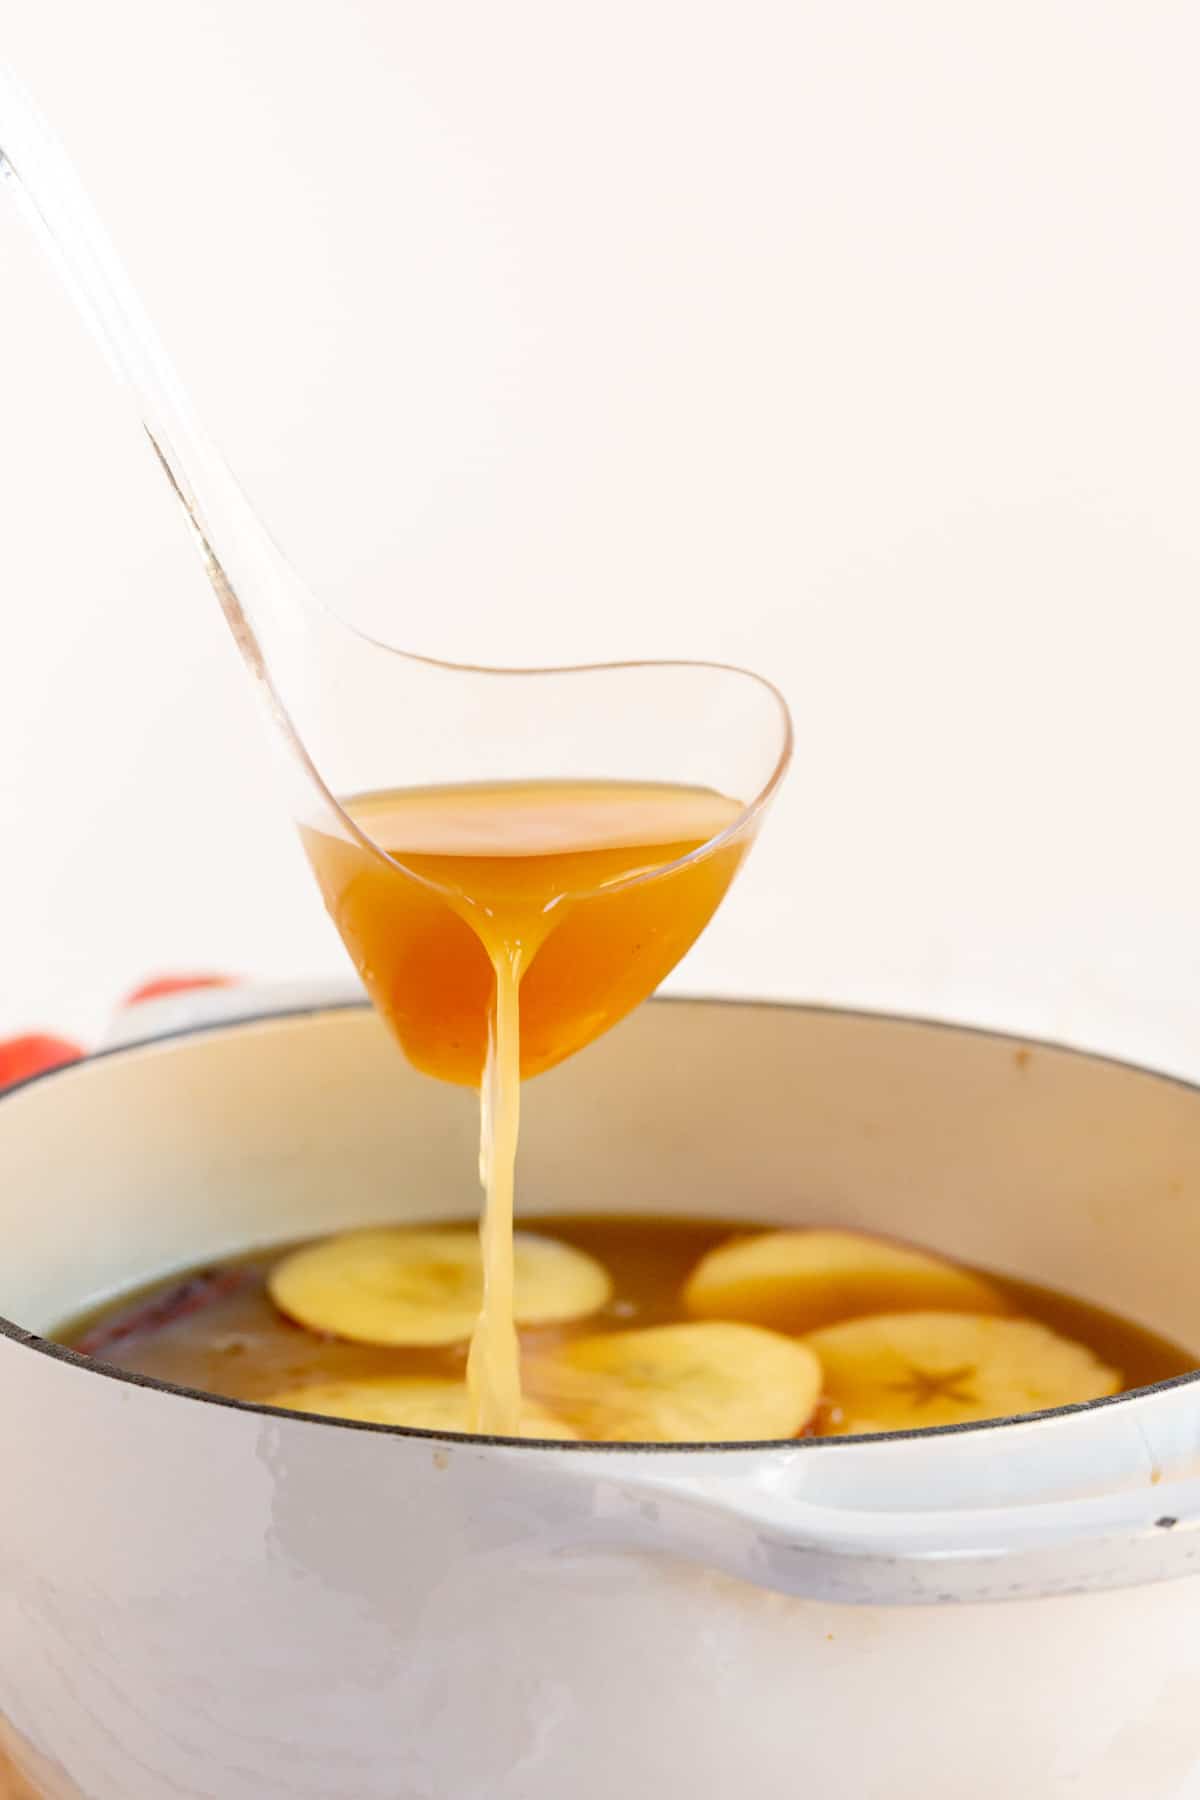 Ladle pouring spiced apple cider into a bowl